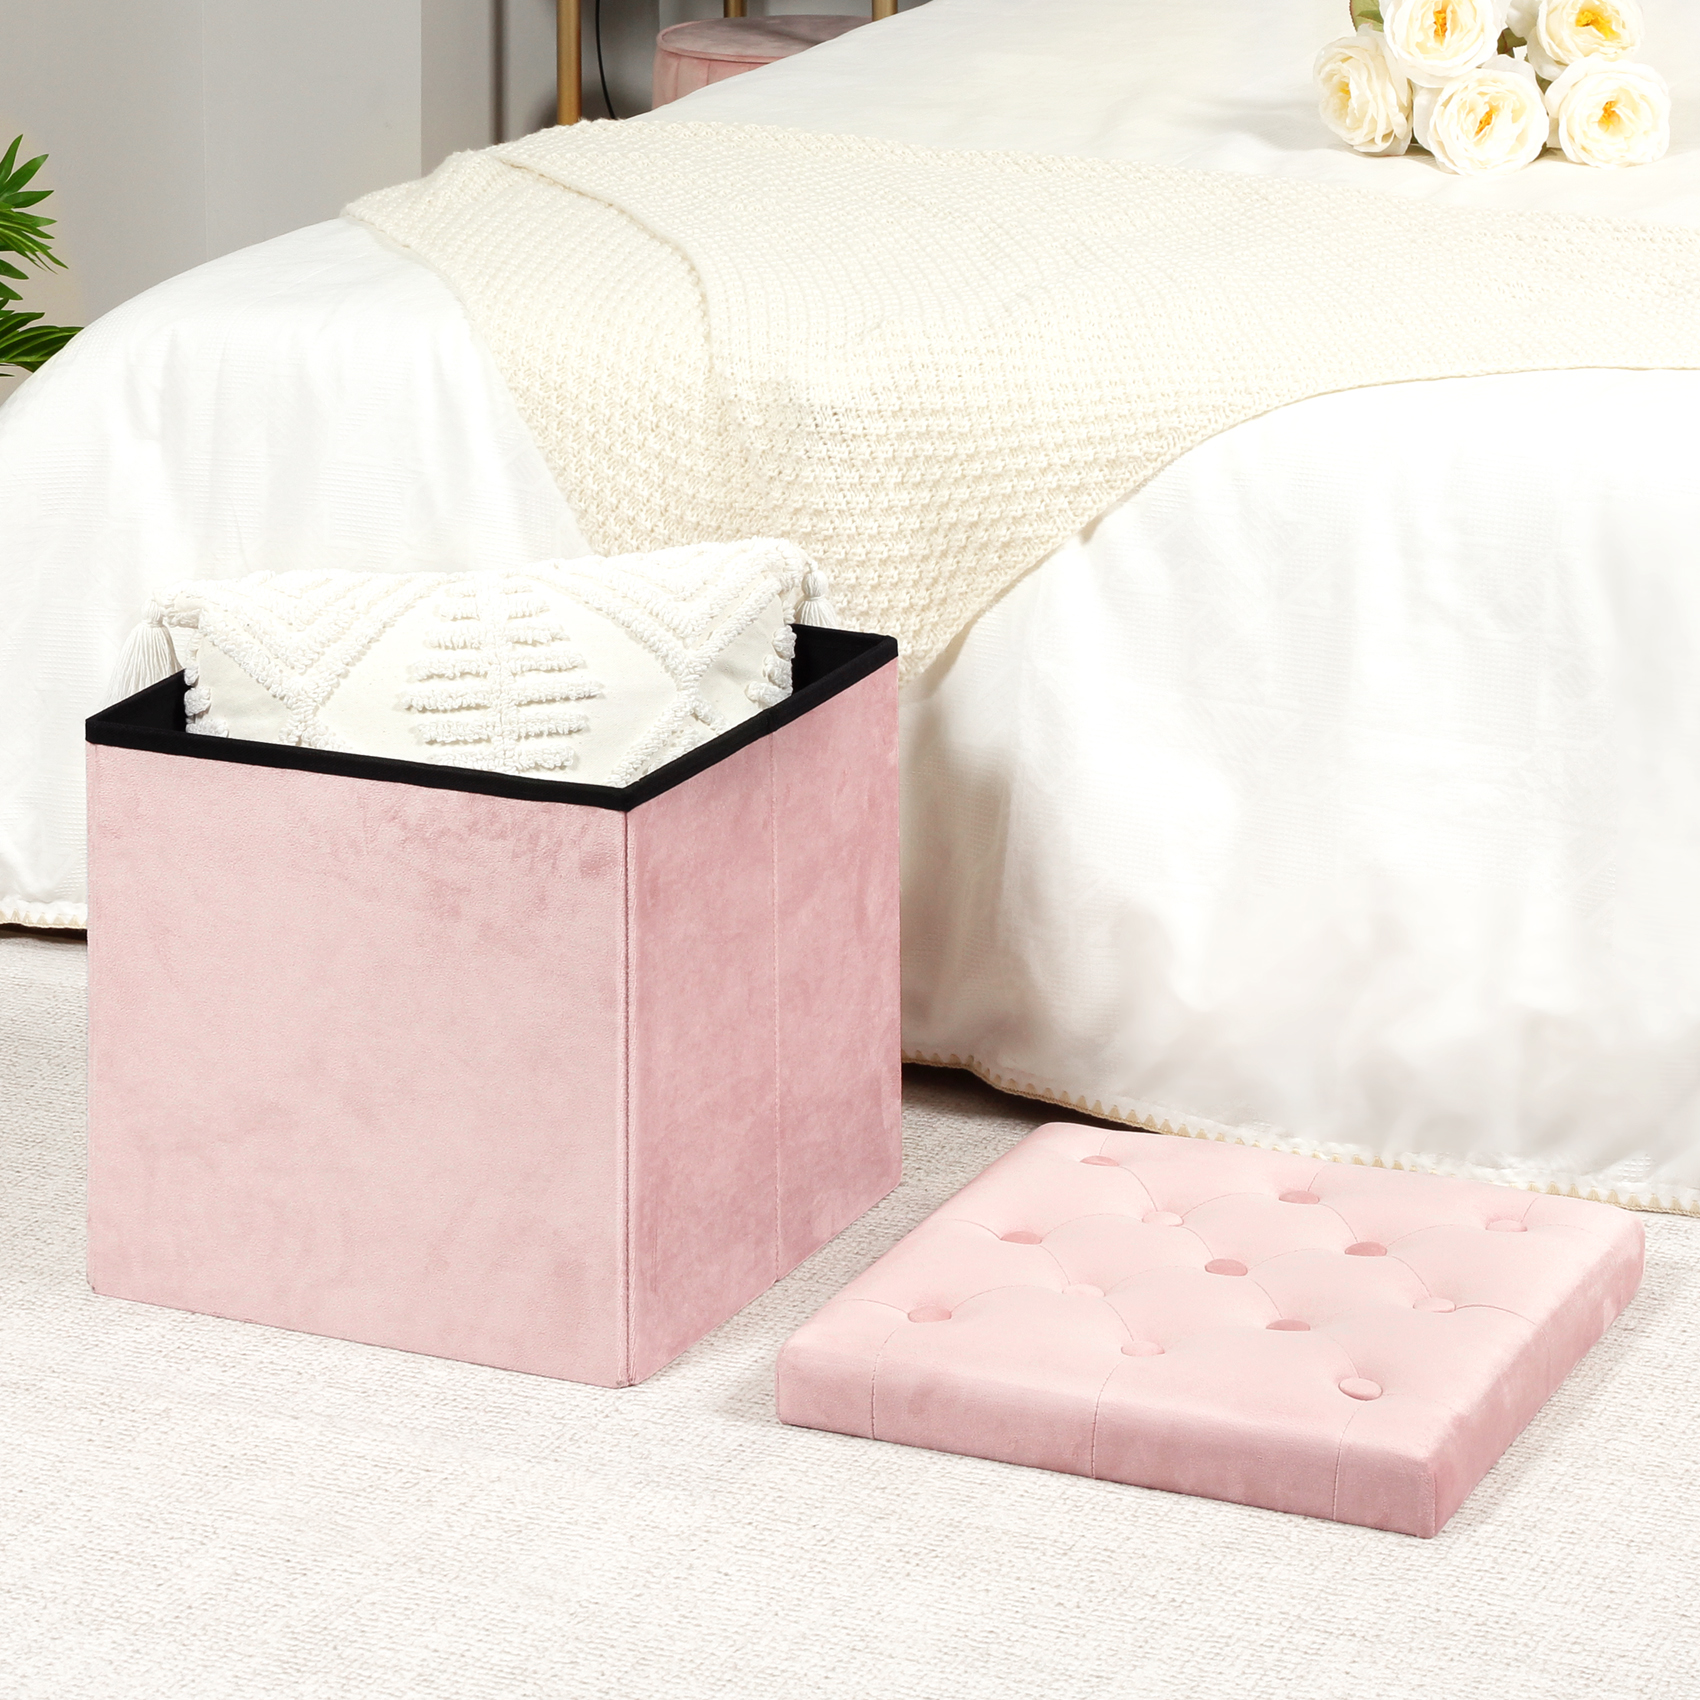 PINPLUS 15.7" Velvet Ottoman with Storage Cube, Folding Rest Seat with Removable Lid, Footstool for Living Room, Pink - image 1 of 7